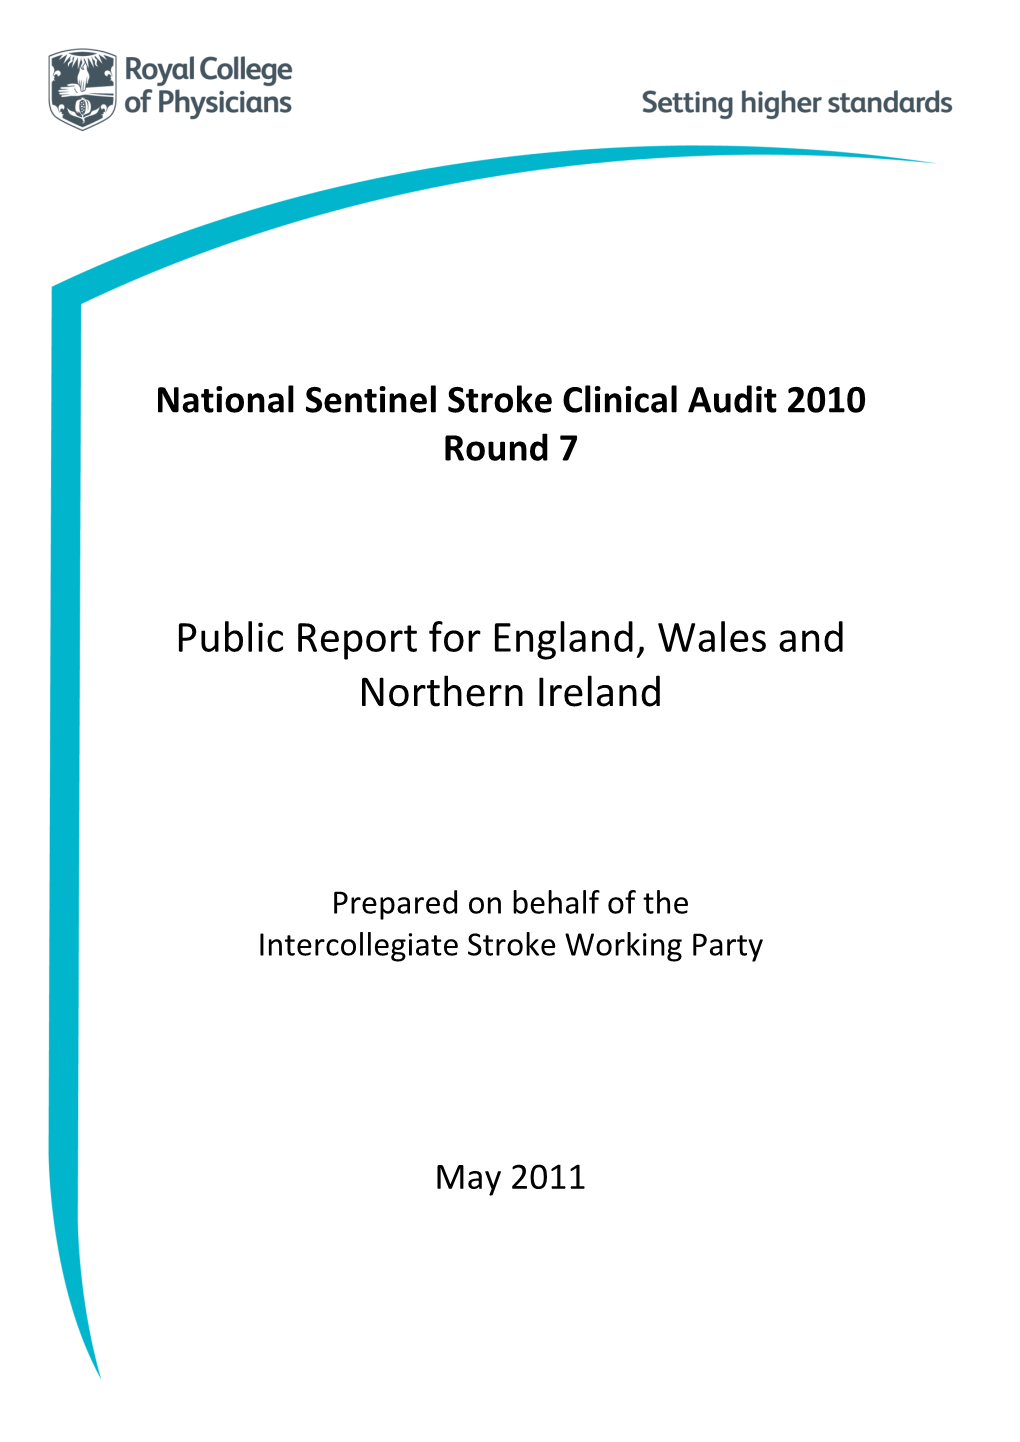 National Sentinel Stroke Clinical Audit 2010 Round 7